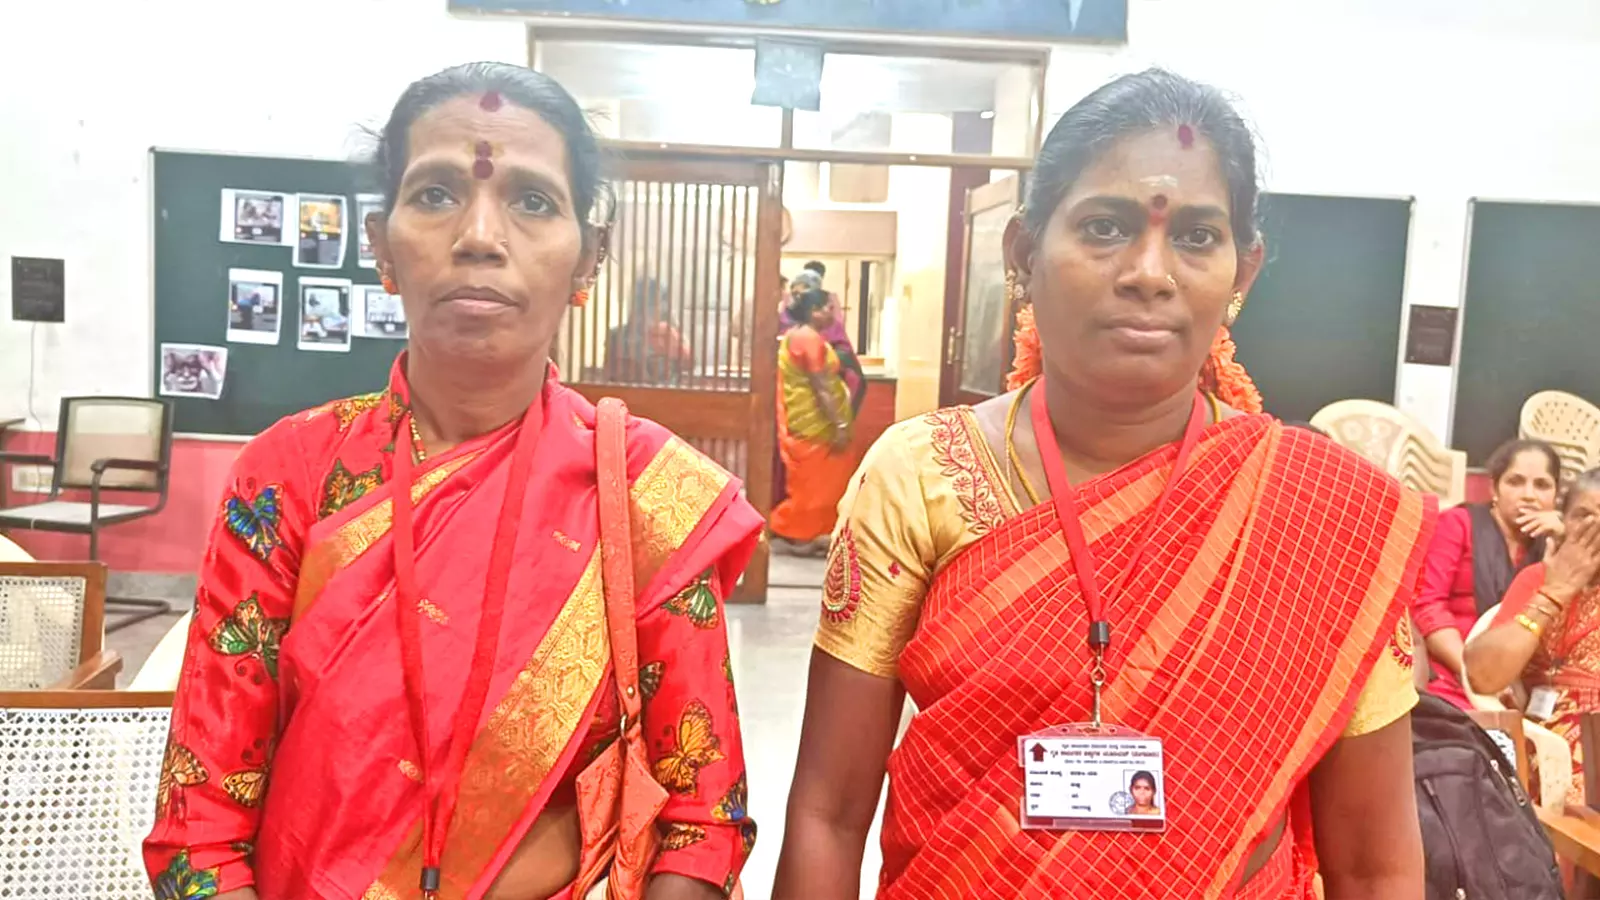 Pushpa (right) and Anu (left) are friends and members of the union.